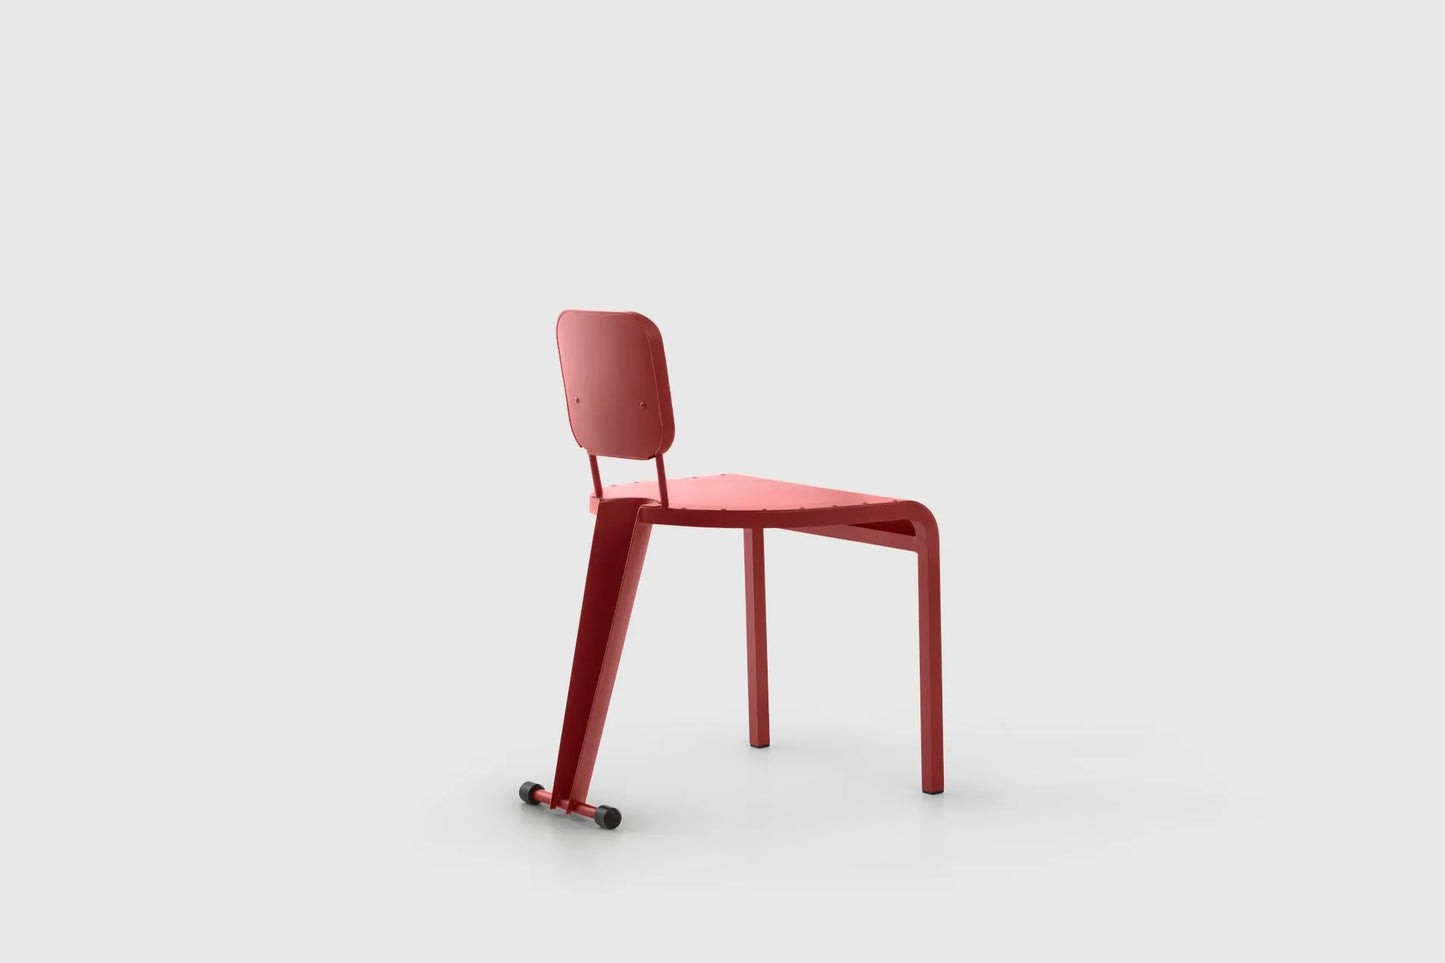 ROCK CHAIR & ARMCHAIR BY DAA - start from $1,900